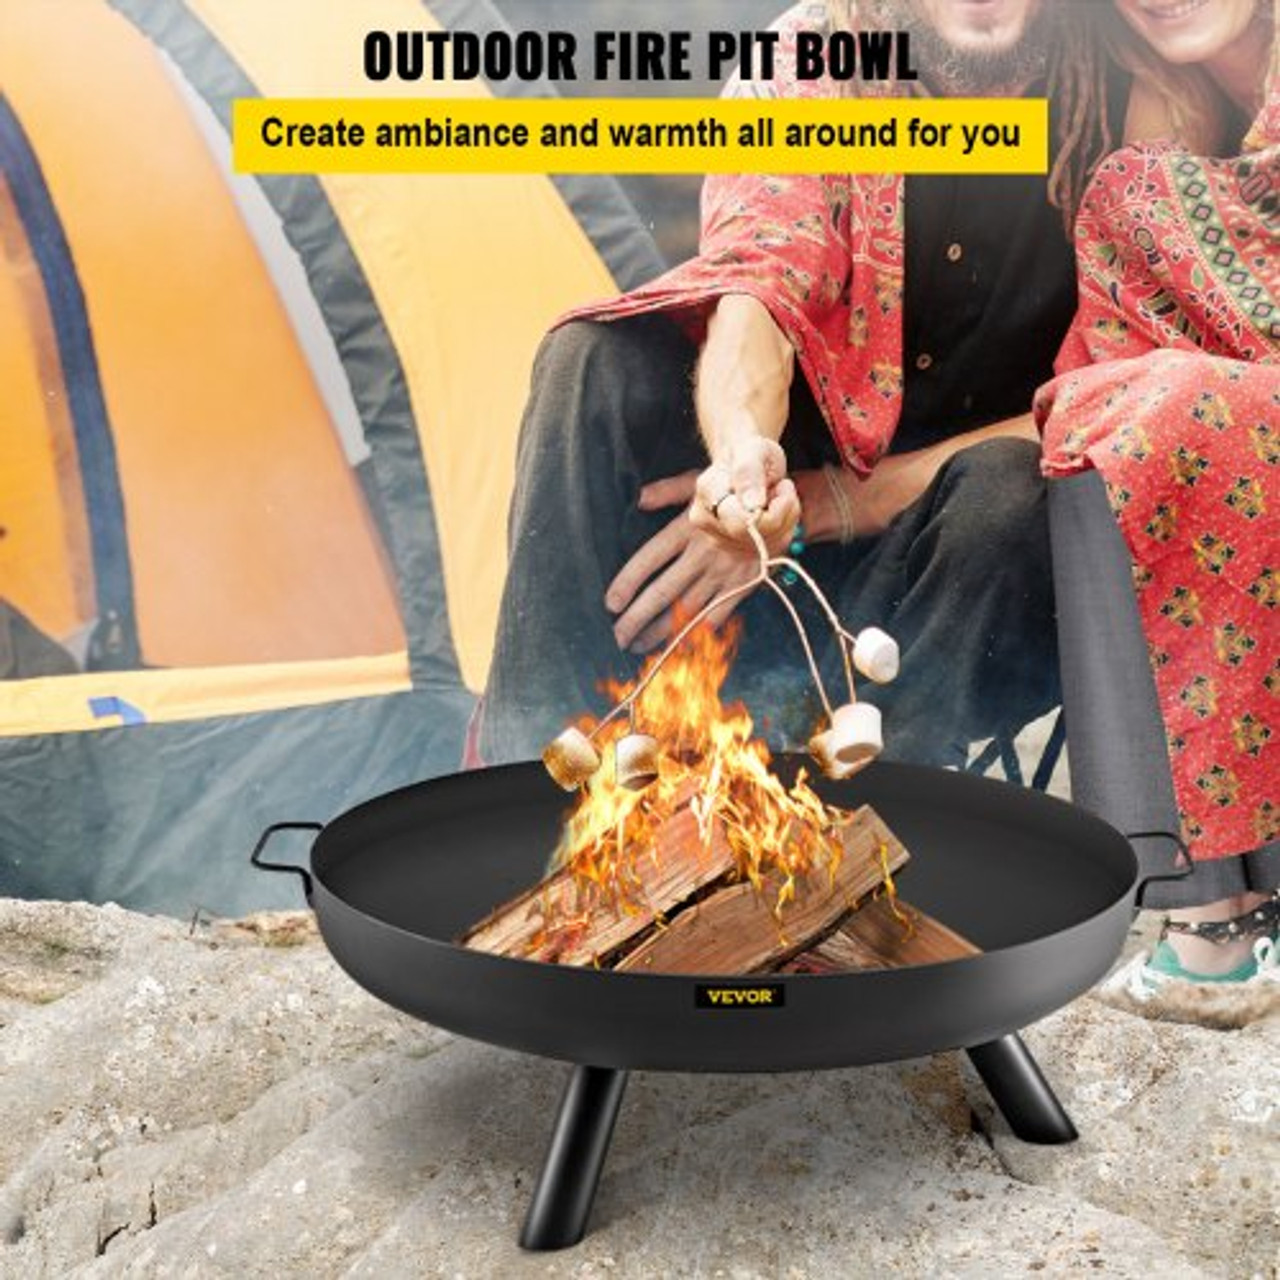 Fire Pit Bowl, 30-Inch Deep Round Carbon Steel Fire Bowl, Wood Burning for Outdoor Patios, Backyards & Camping Uses, with A Drain Hole, Portable Handles and A Firewood Stick, Black